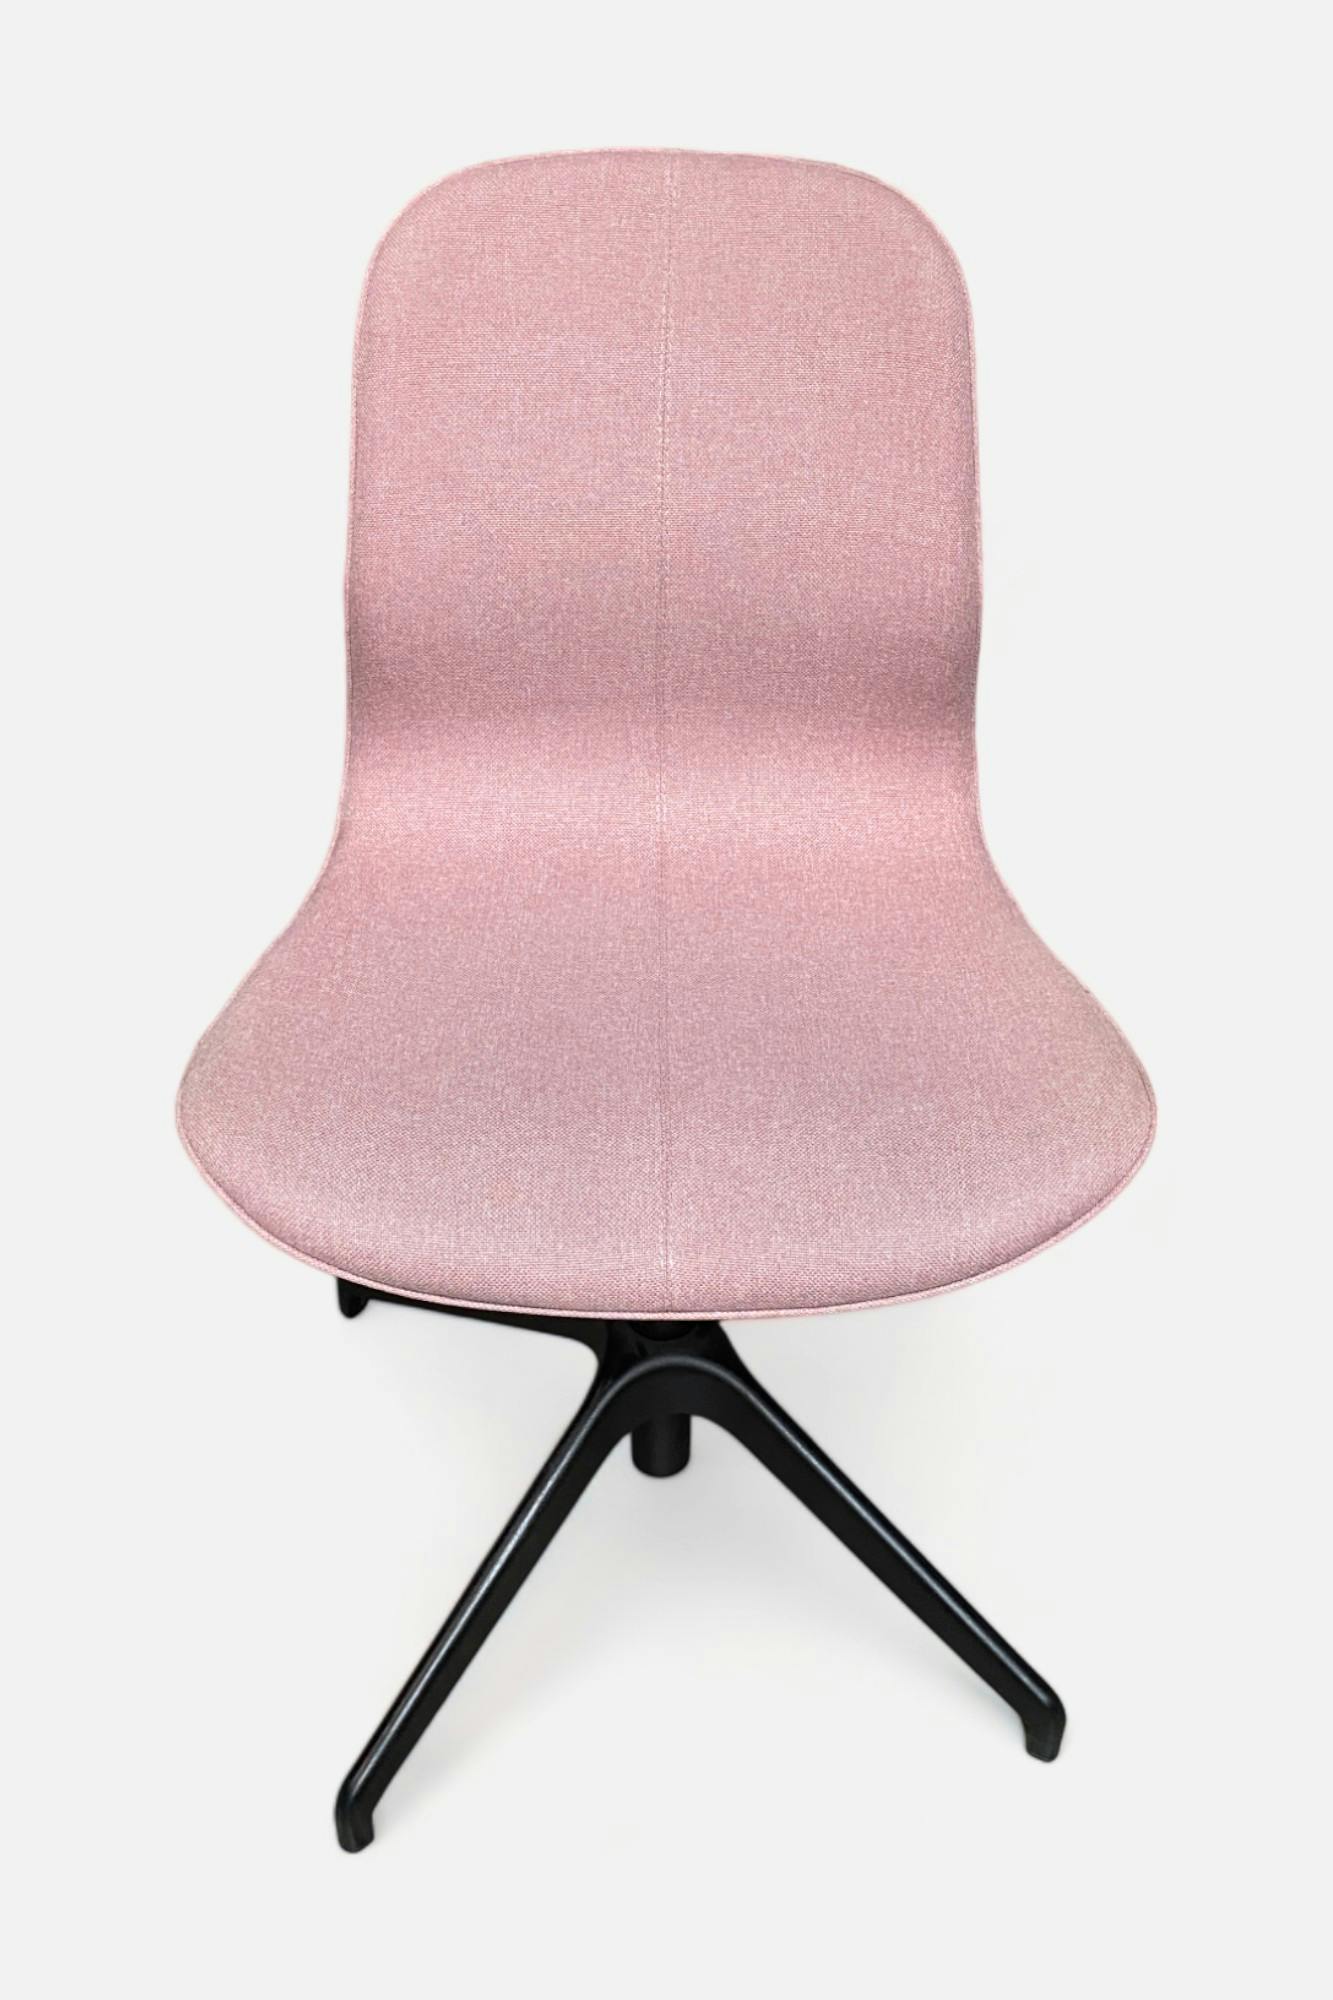 Light Pink adjustable Meeting chair on black legs - Relieve Furniture